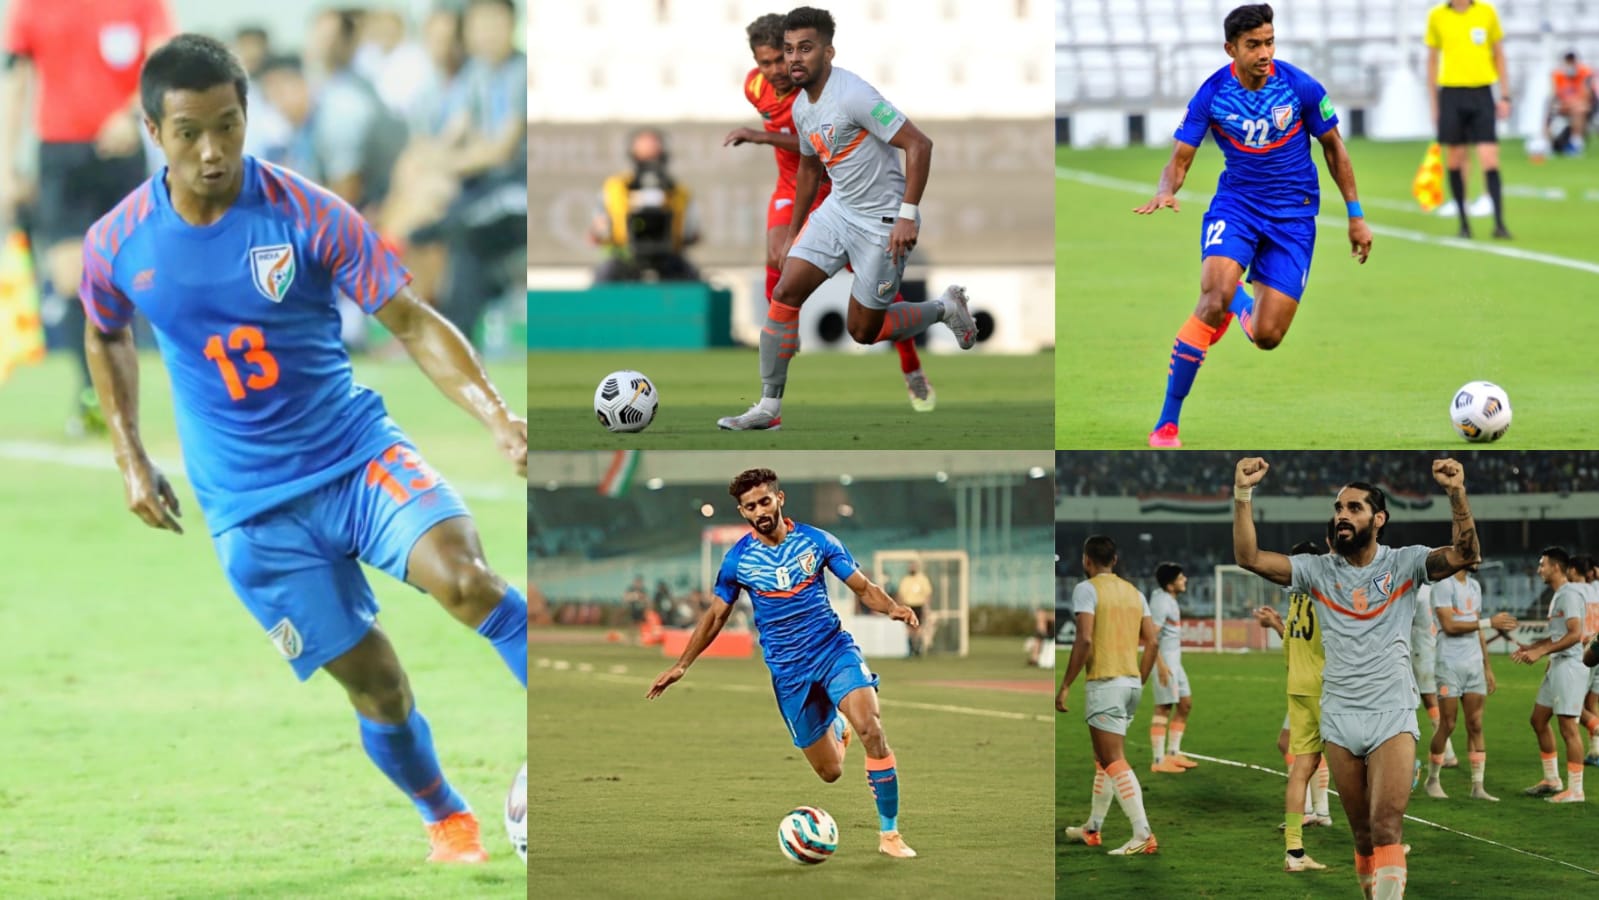 ind-vs-vie-live-from-brandon-fernandes-to-sandesh-jhingan-five-players-to-watch-in-india-s-encounter-against-vietnam